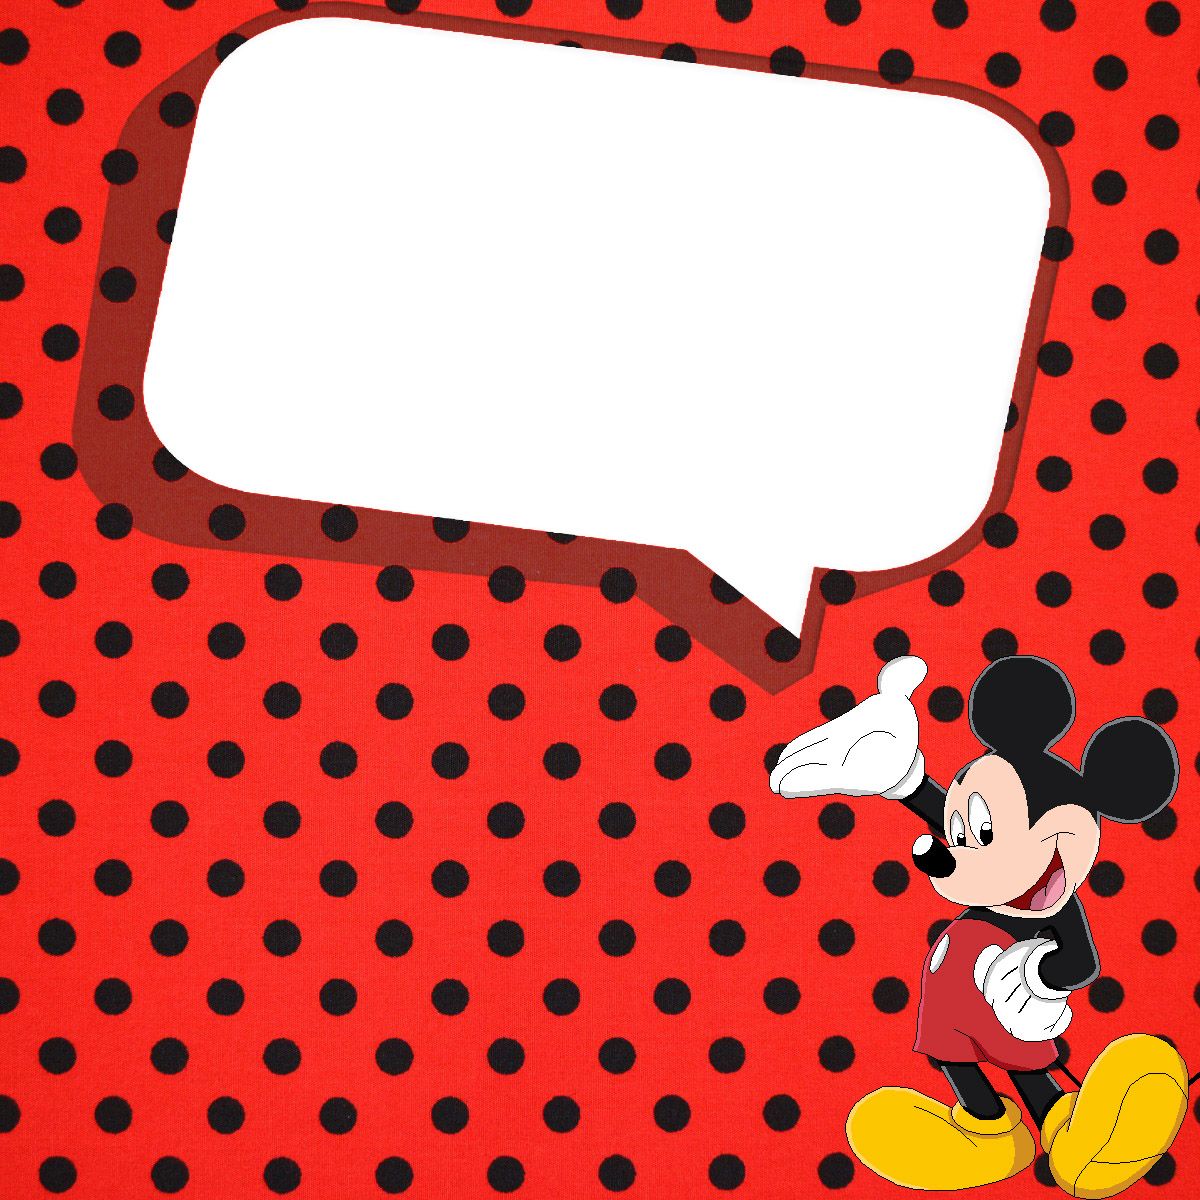 Mickey Mouse Invitation Template Printable from www.showerinvitationsonline.com